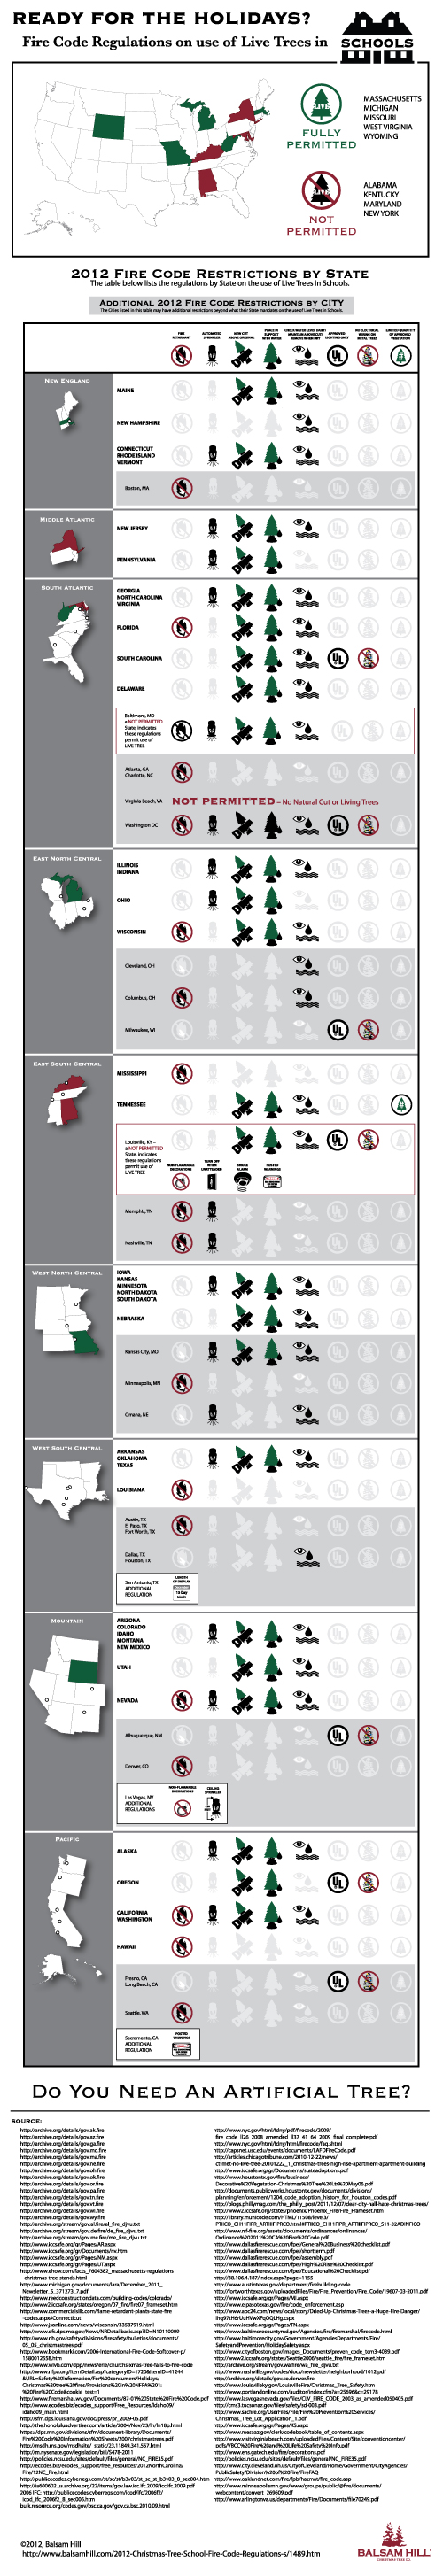 Fire Code Regulations for Live Christmas Trees in Schools infographic